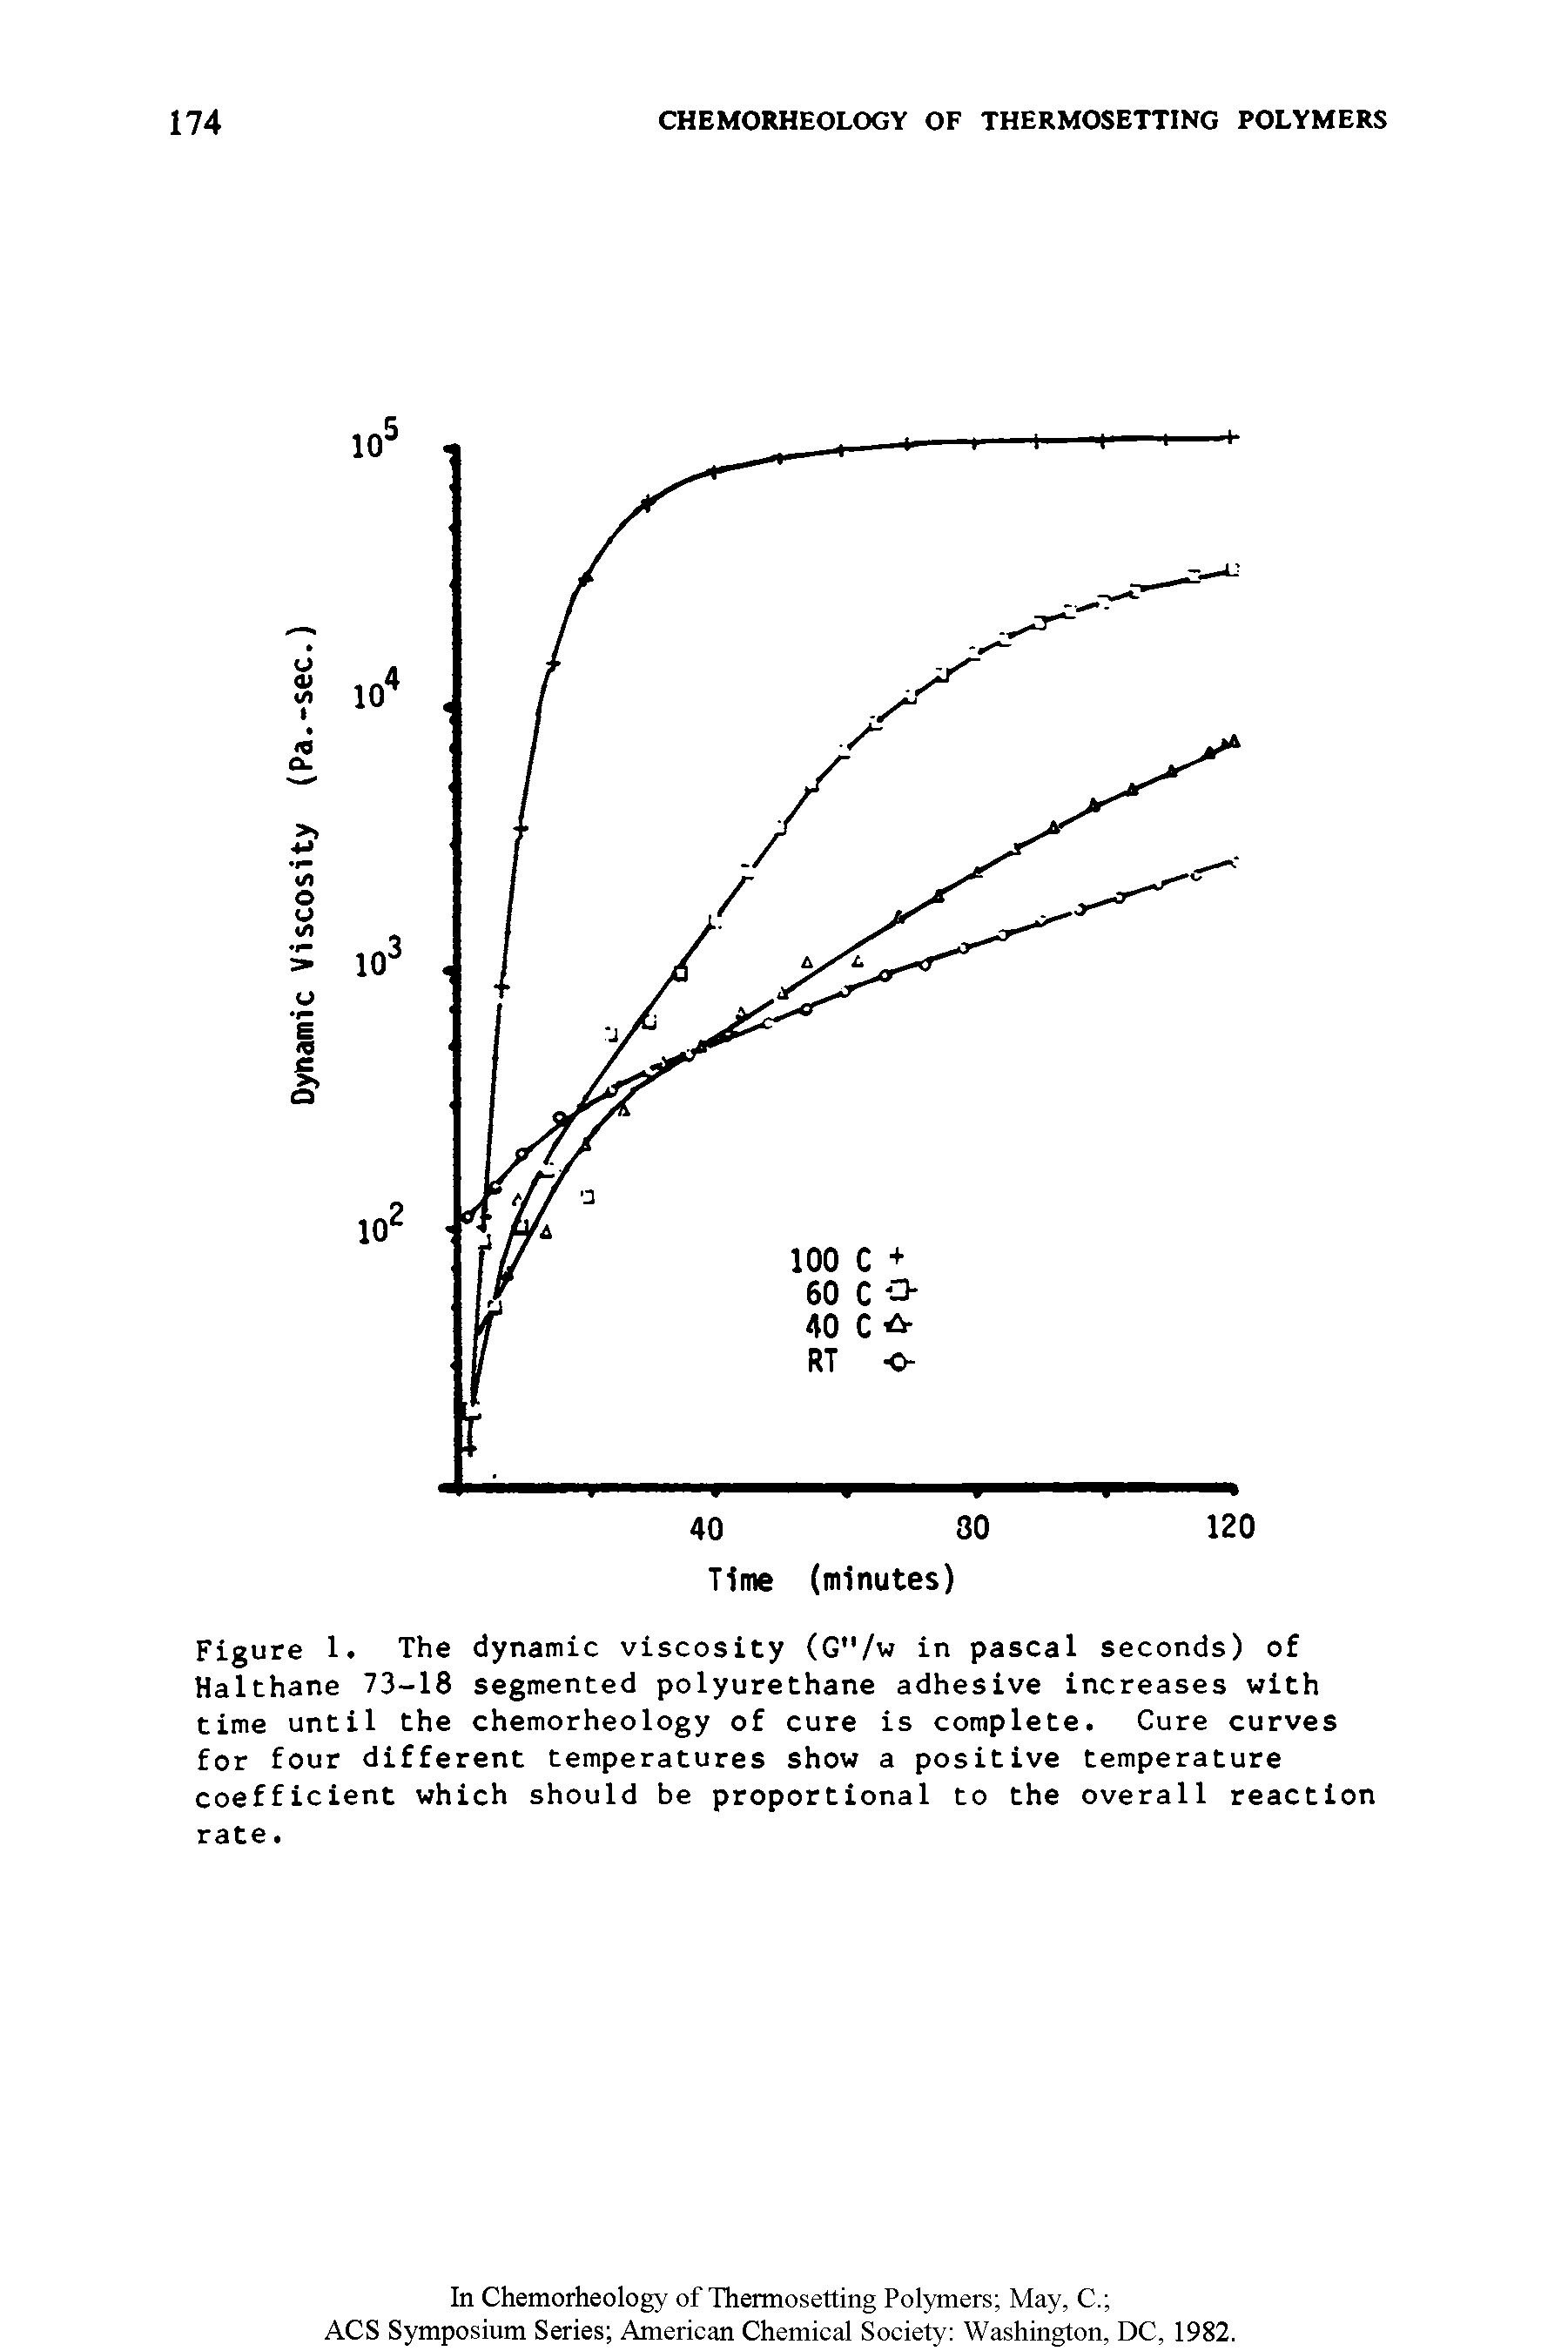 Figure 1. The dynamic viscosity (G"/w in pascal seconds) of Halthane 73-18 segmented polyurethane adhesive increases with time until the chemorheology of cure is complete. Cure curves for four different temperatures show a positive temperature coefficient which should be proportional to the overall reaction rate.